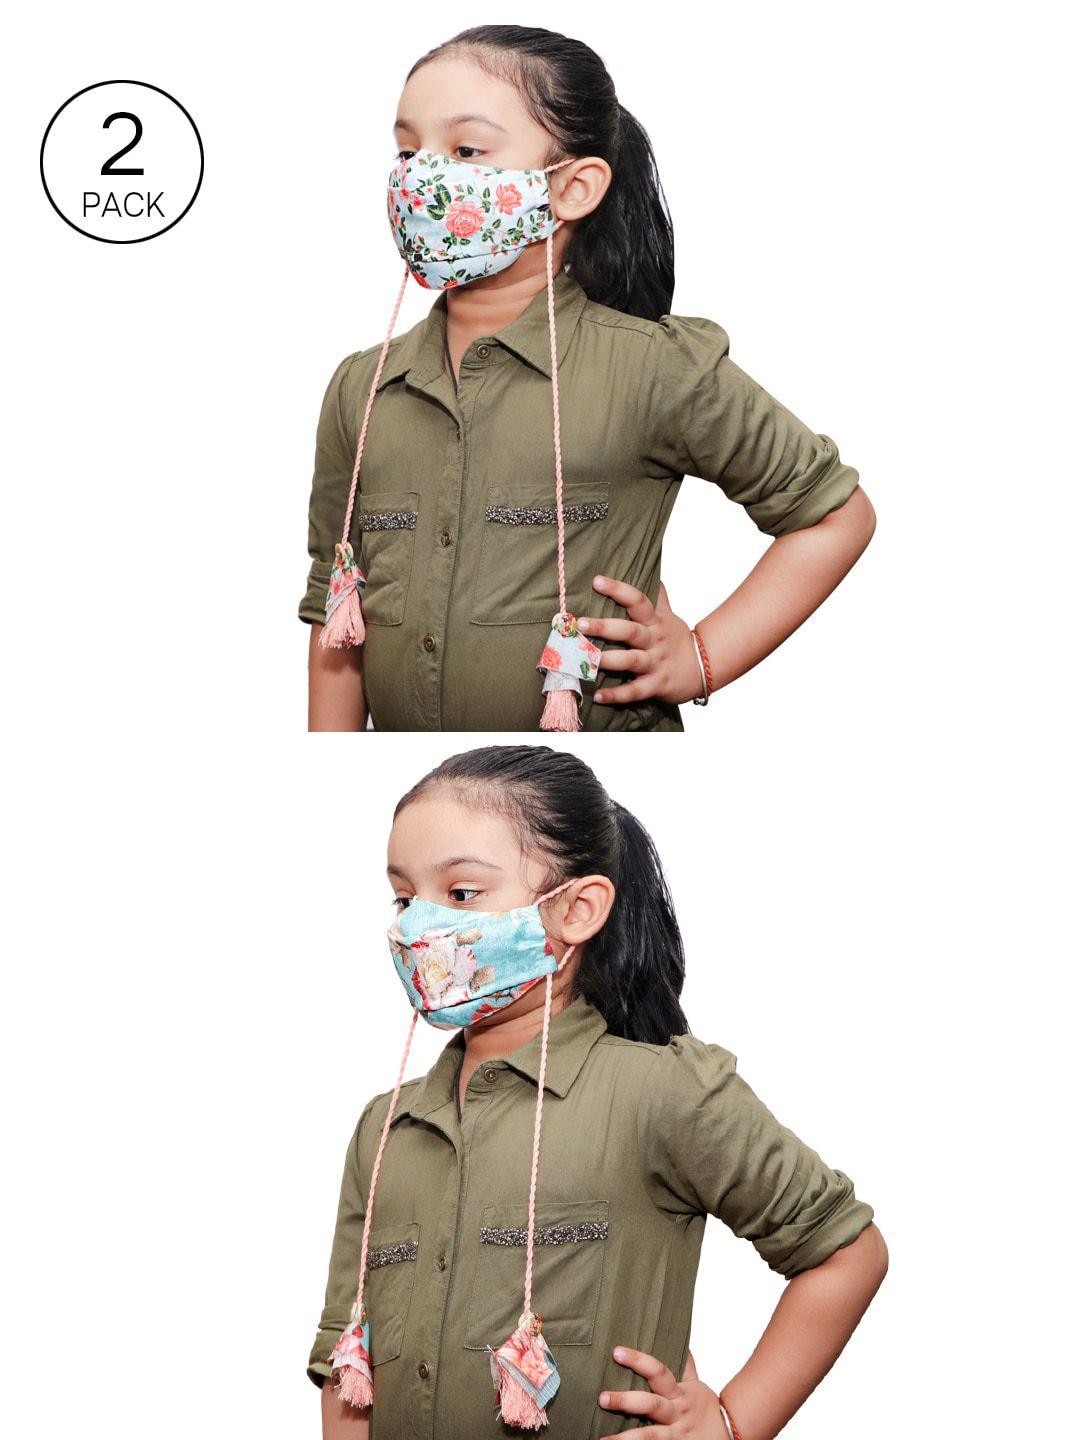 jbn creation kids pack of 2 printed 3-ply reusable outdoor face masks